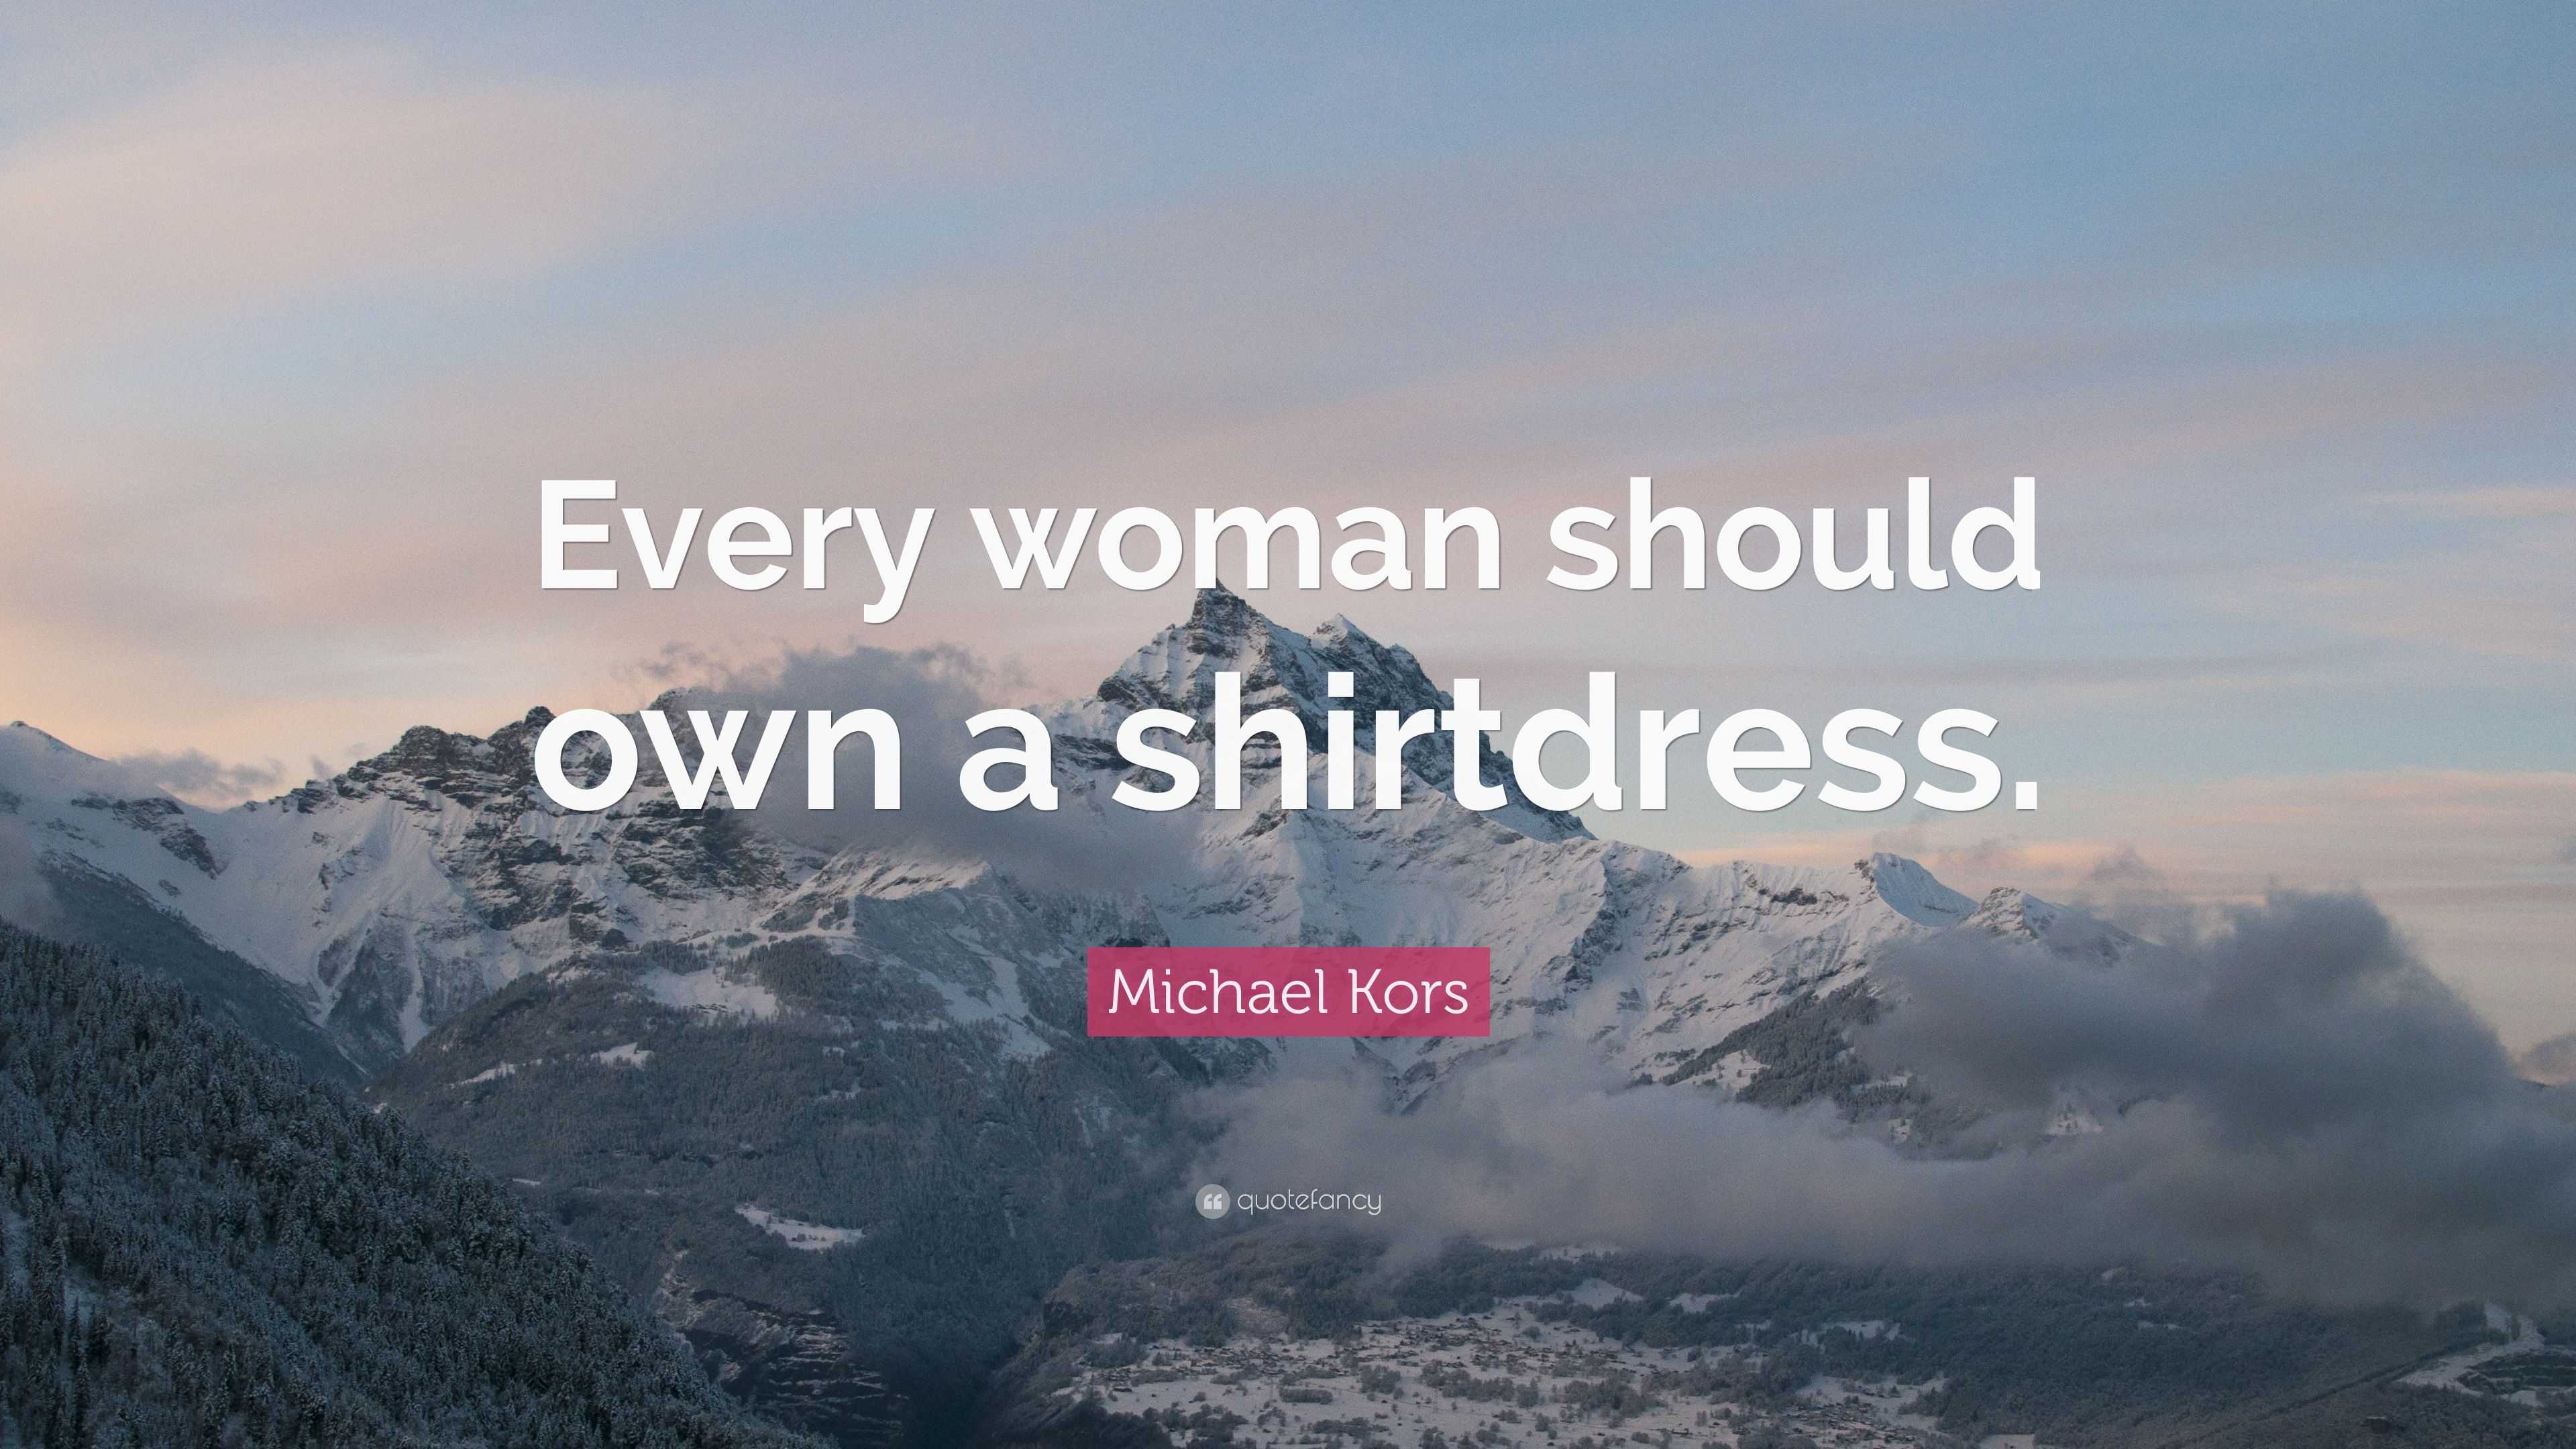 Slime Taxpayer Enlighten Michael Kors Quote: “Every woman should own a shirtdress.”